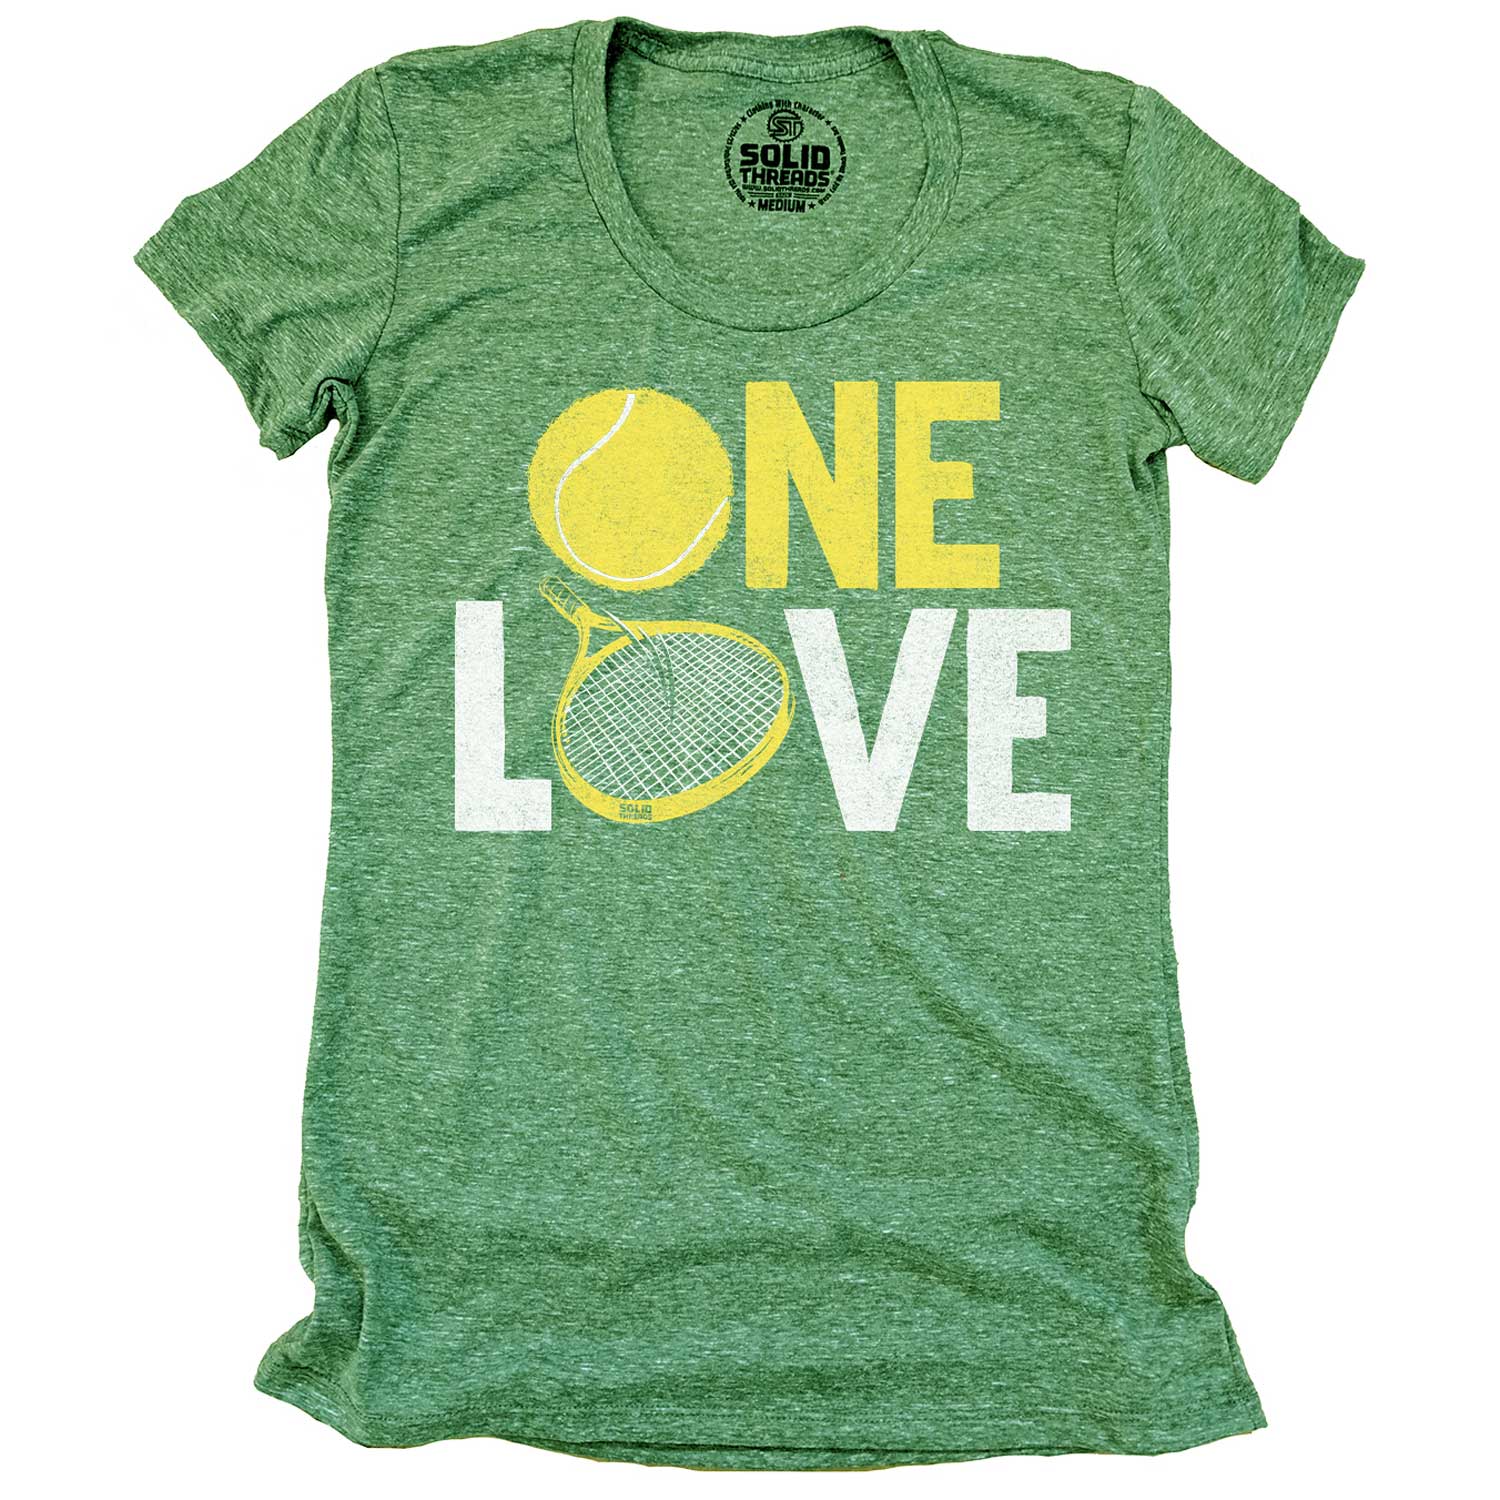 Women's One Love Cool Sports Graphic T-Shirt | Vintage Tennis Racket Soft Tee | Solid Threads